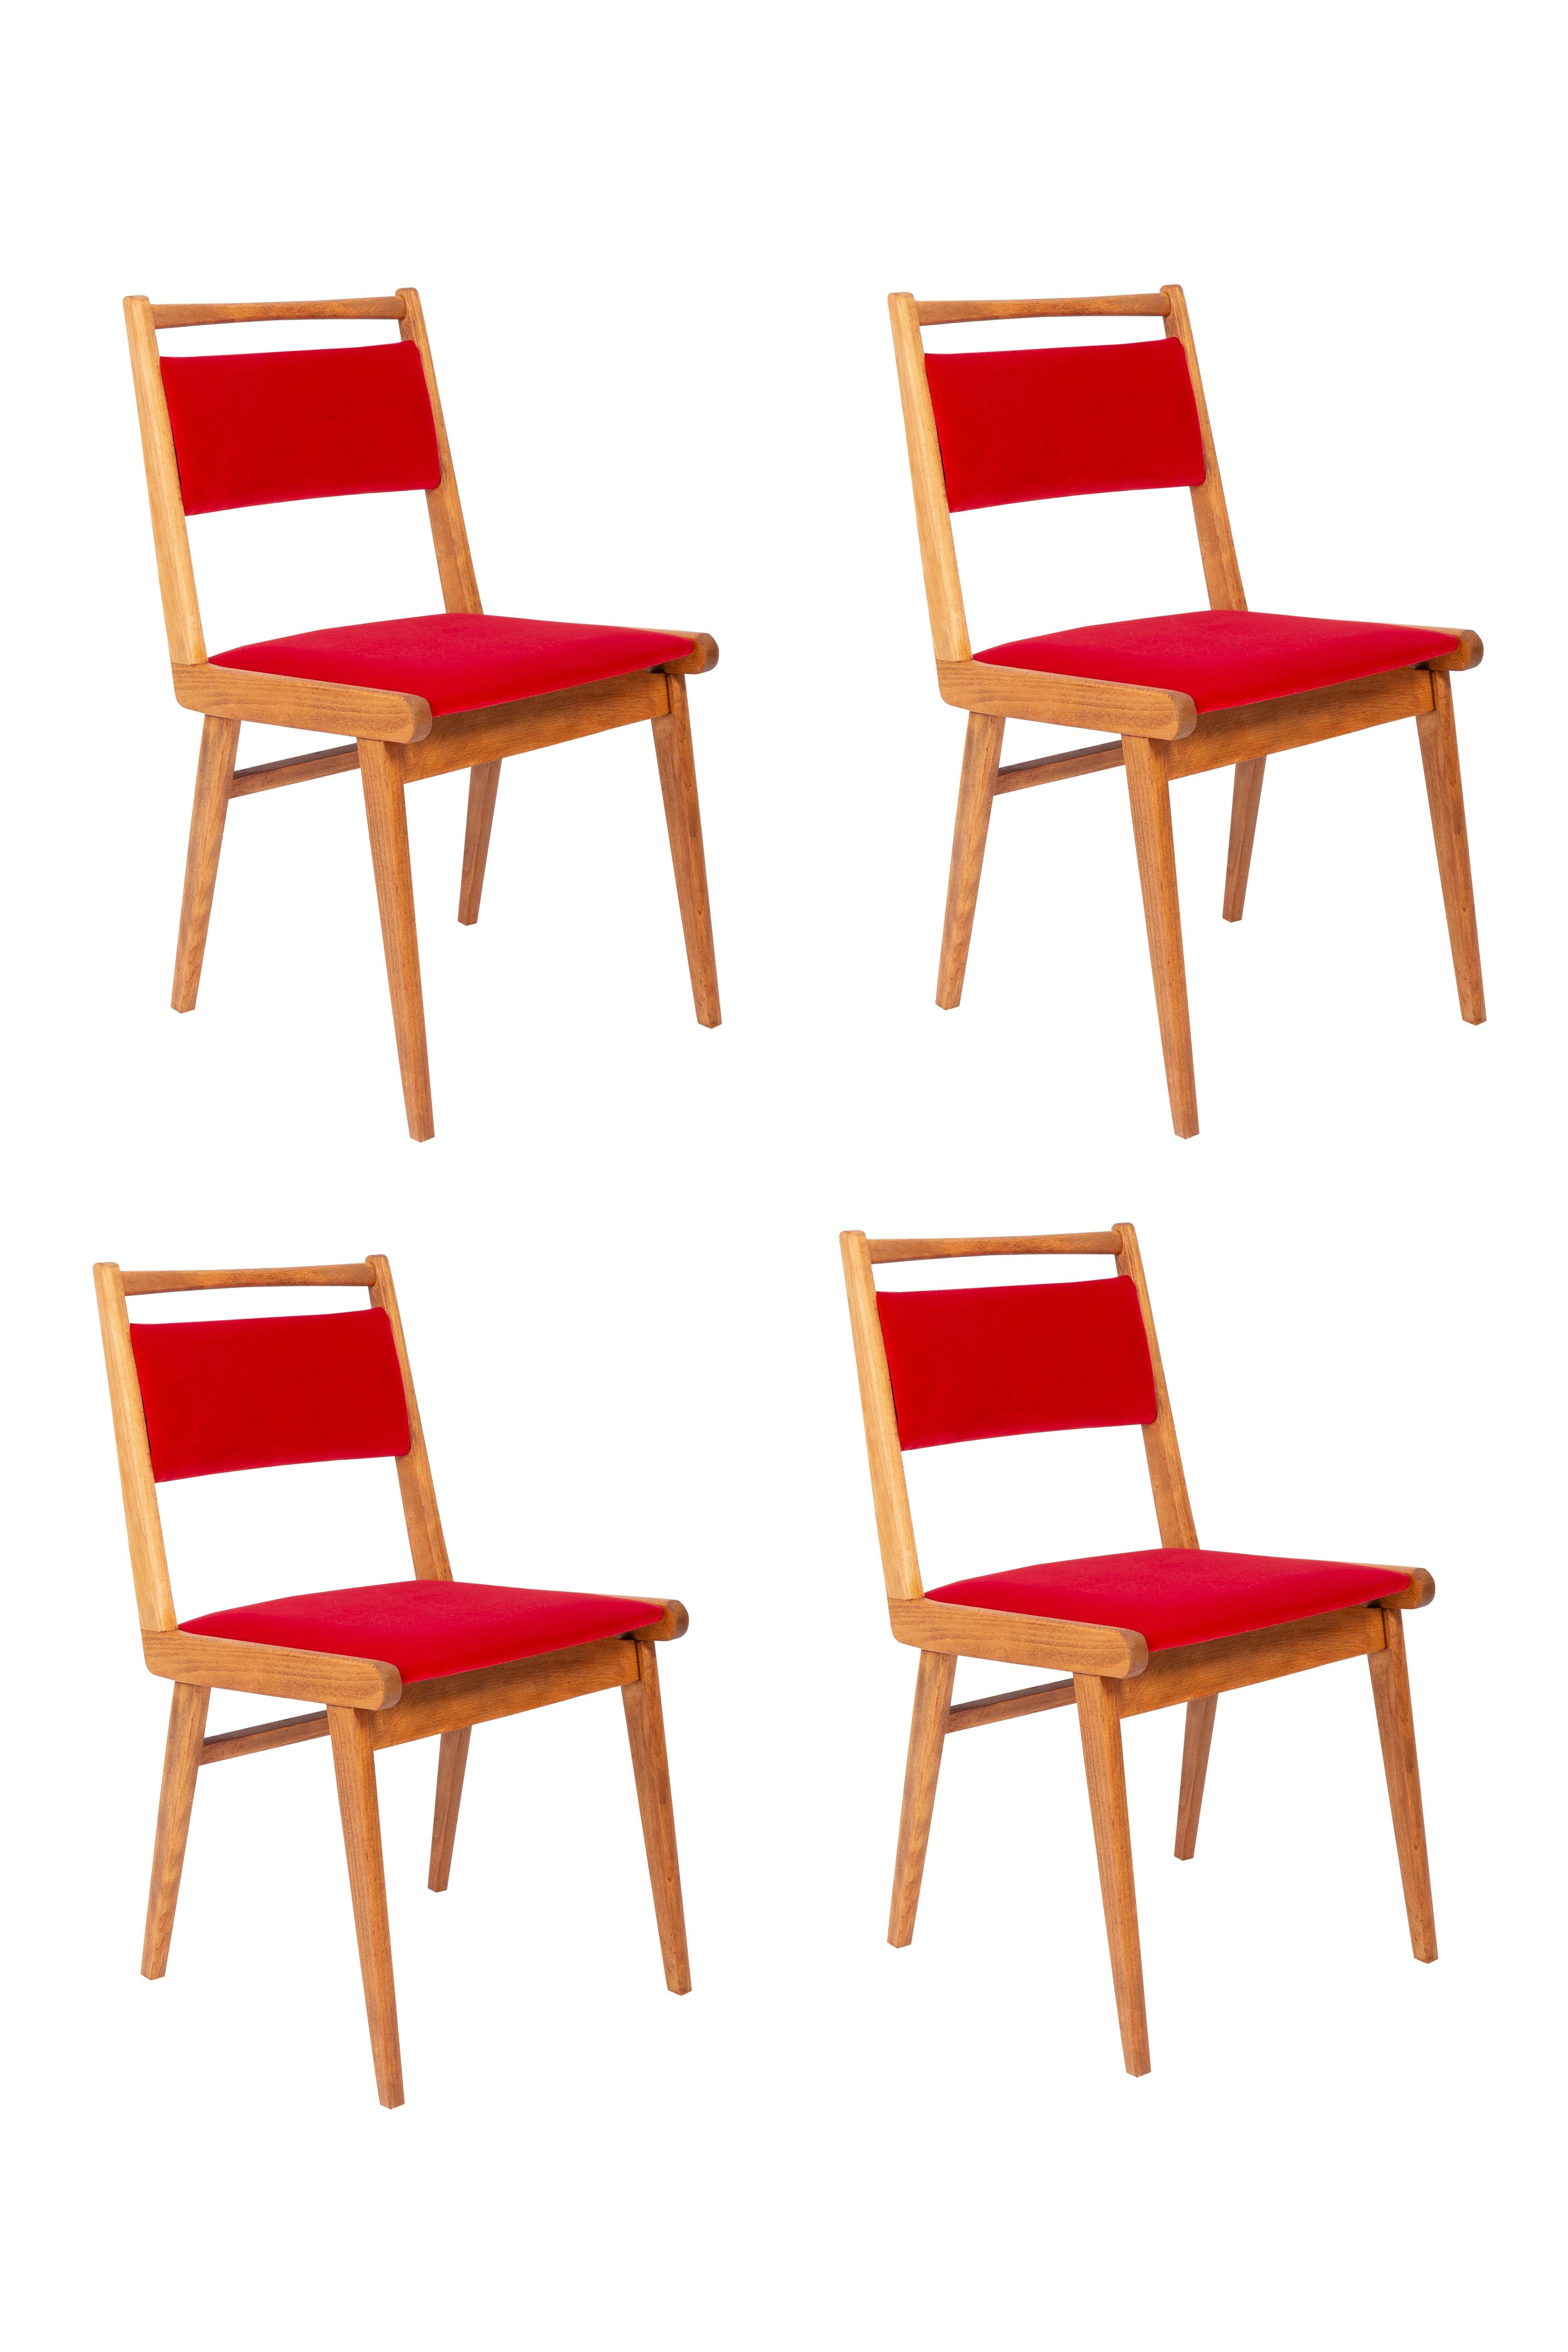 Chairs designed by Prof. Rajmund Halas. It is JAR type model. Made of beechwood. Chairs are after a complete upholstery renovation, the woodwork has been refreshed. Seat and back is dressed in a red, durable and pleasant to the touch velvet fabric.